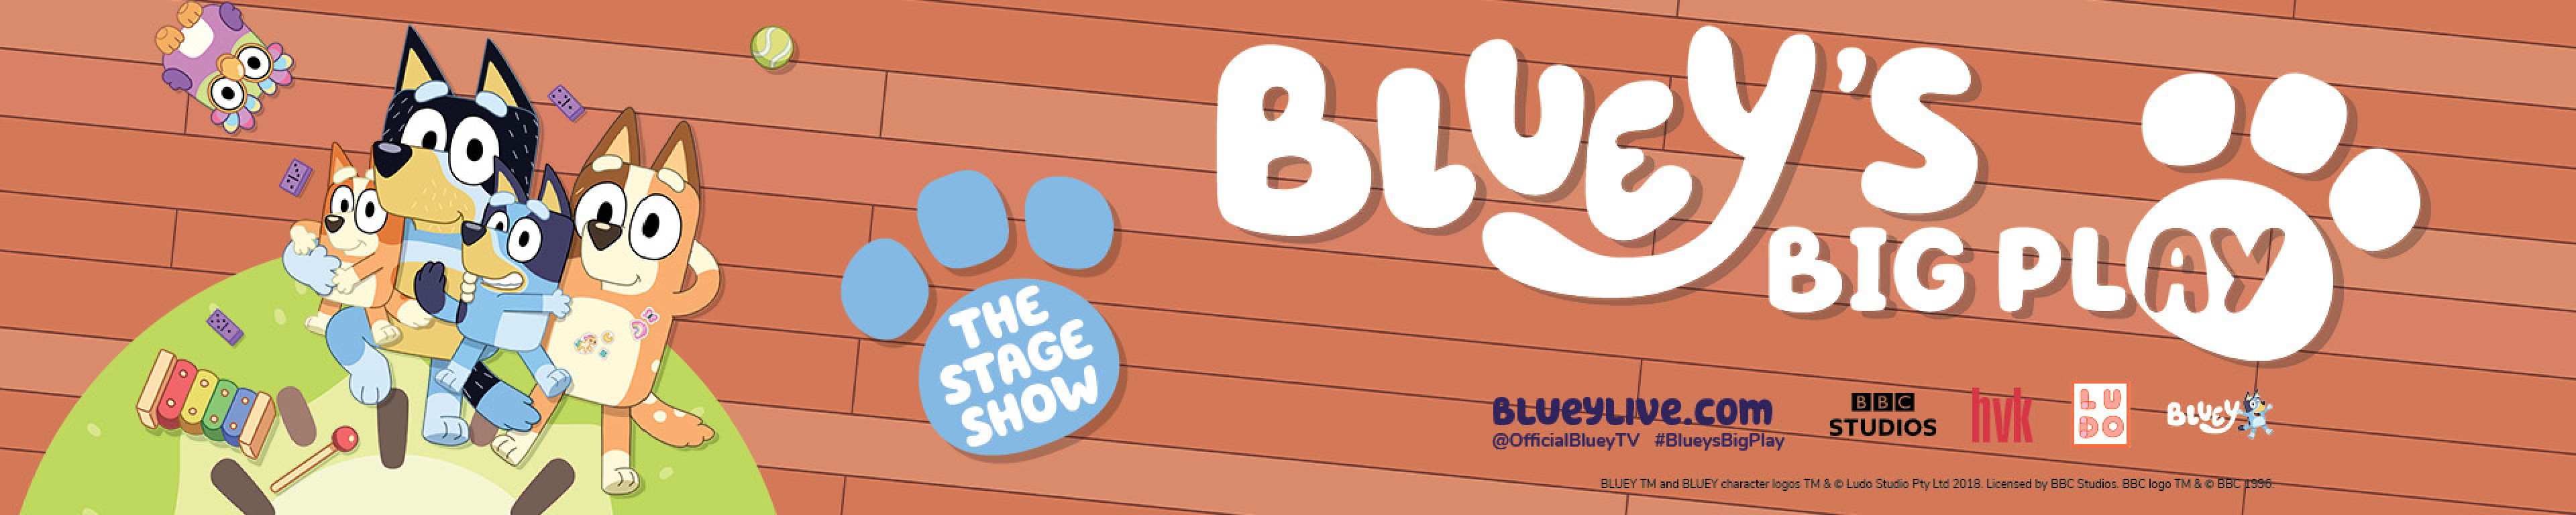 Bluey's Big Play and animated characters